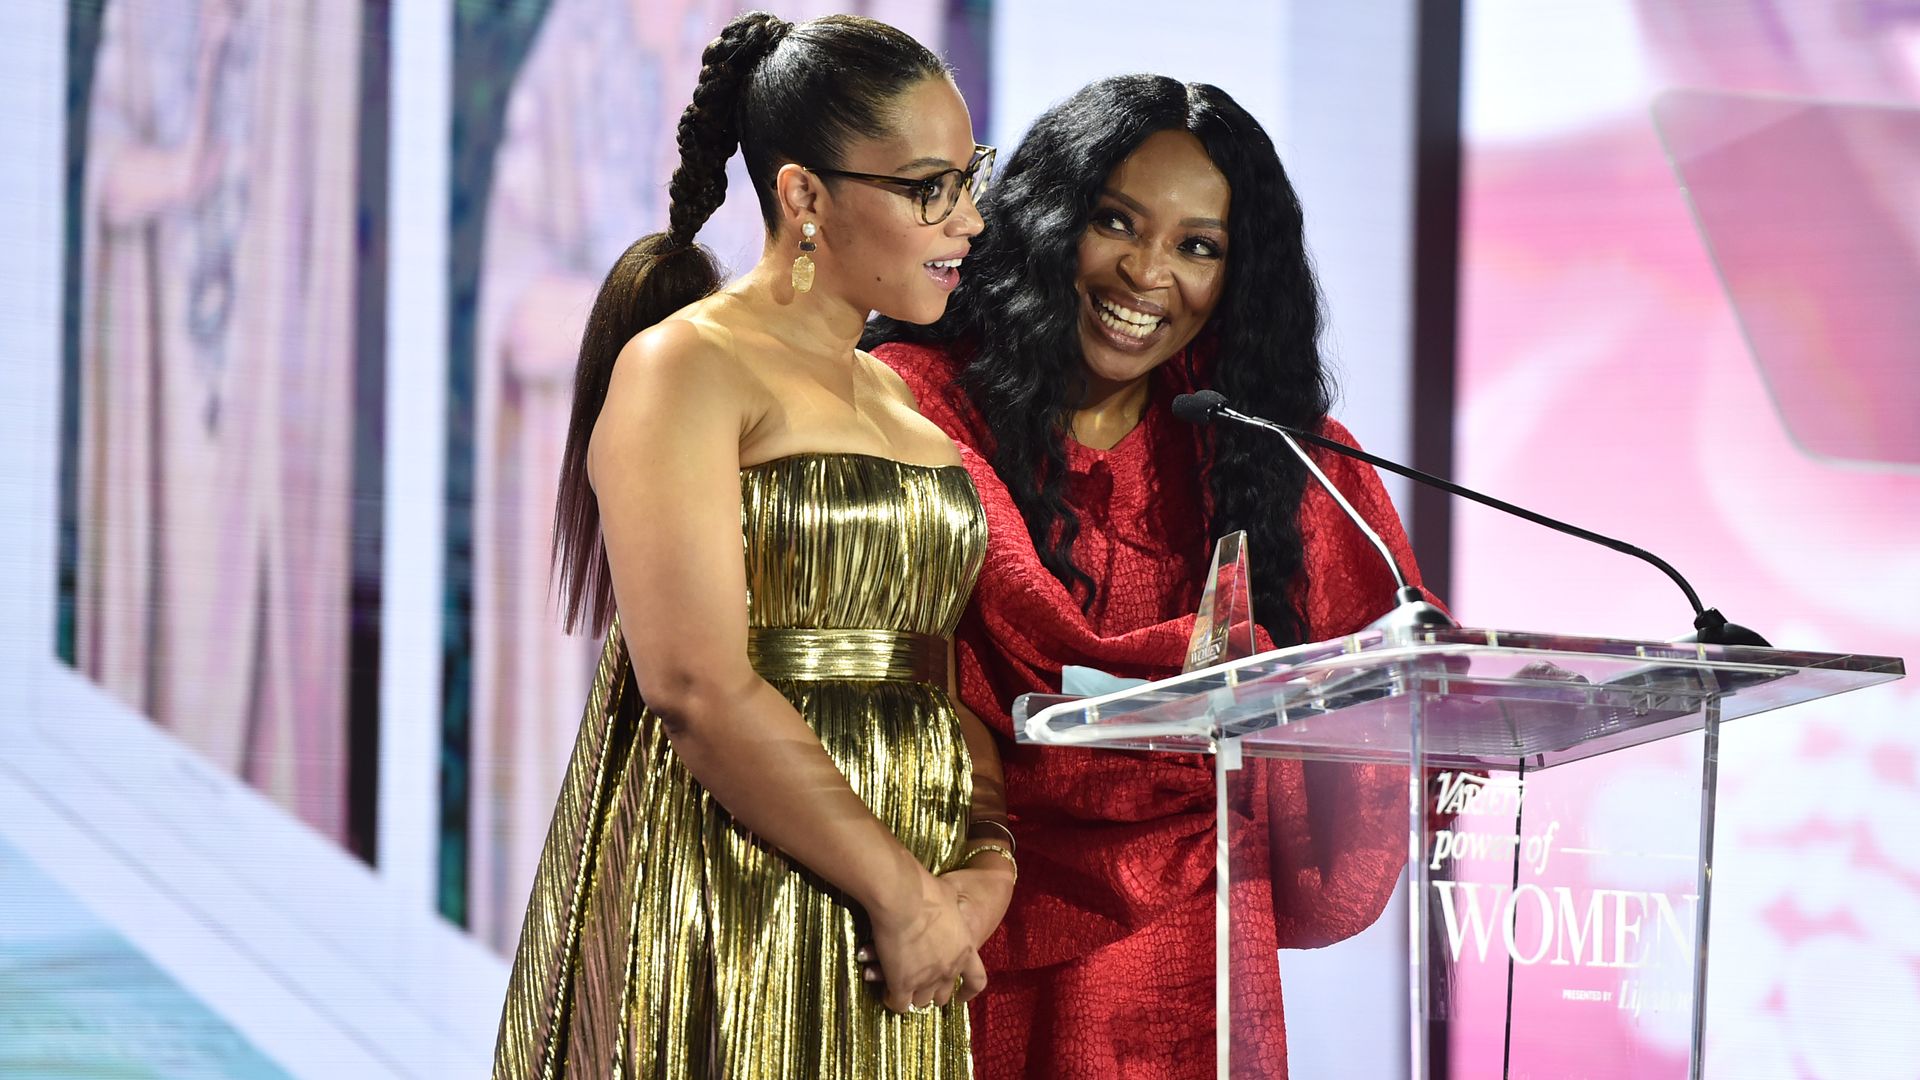 Bianca Lawson and Tina Lifford speak onstage during Variety's Power of Women event in 2022